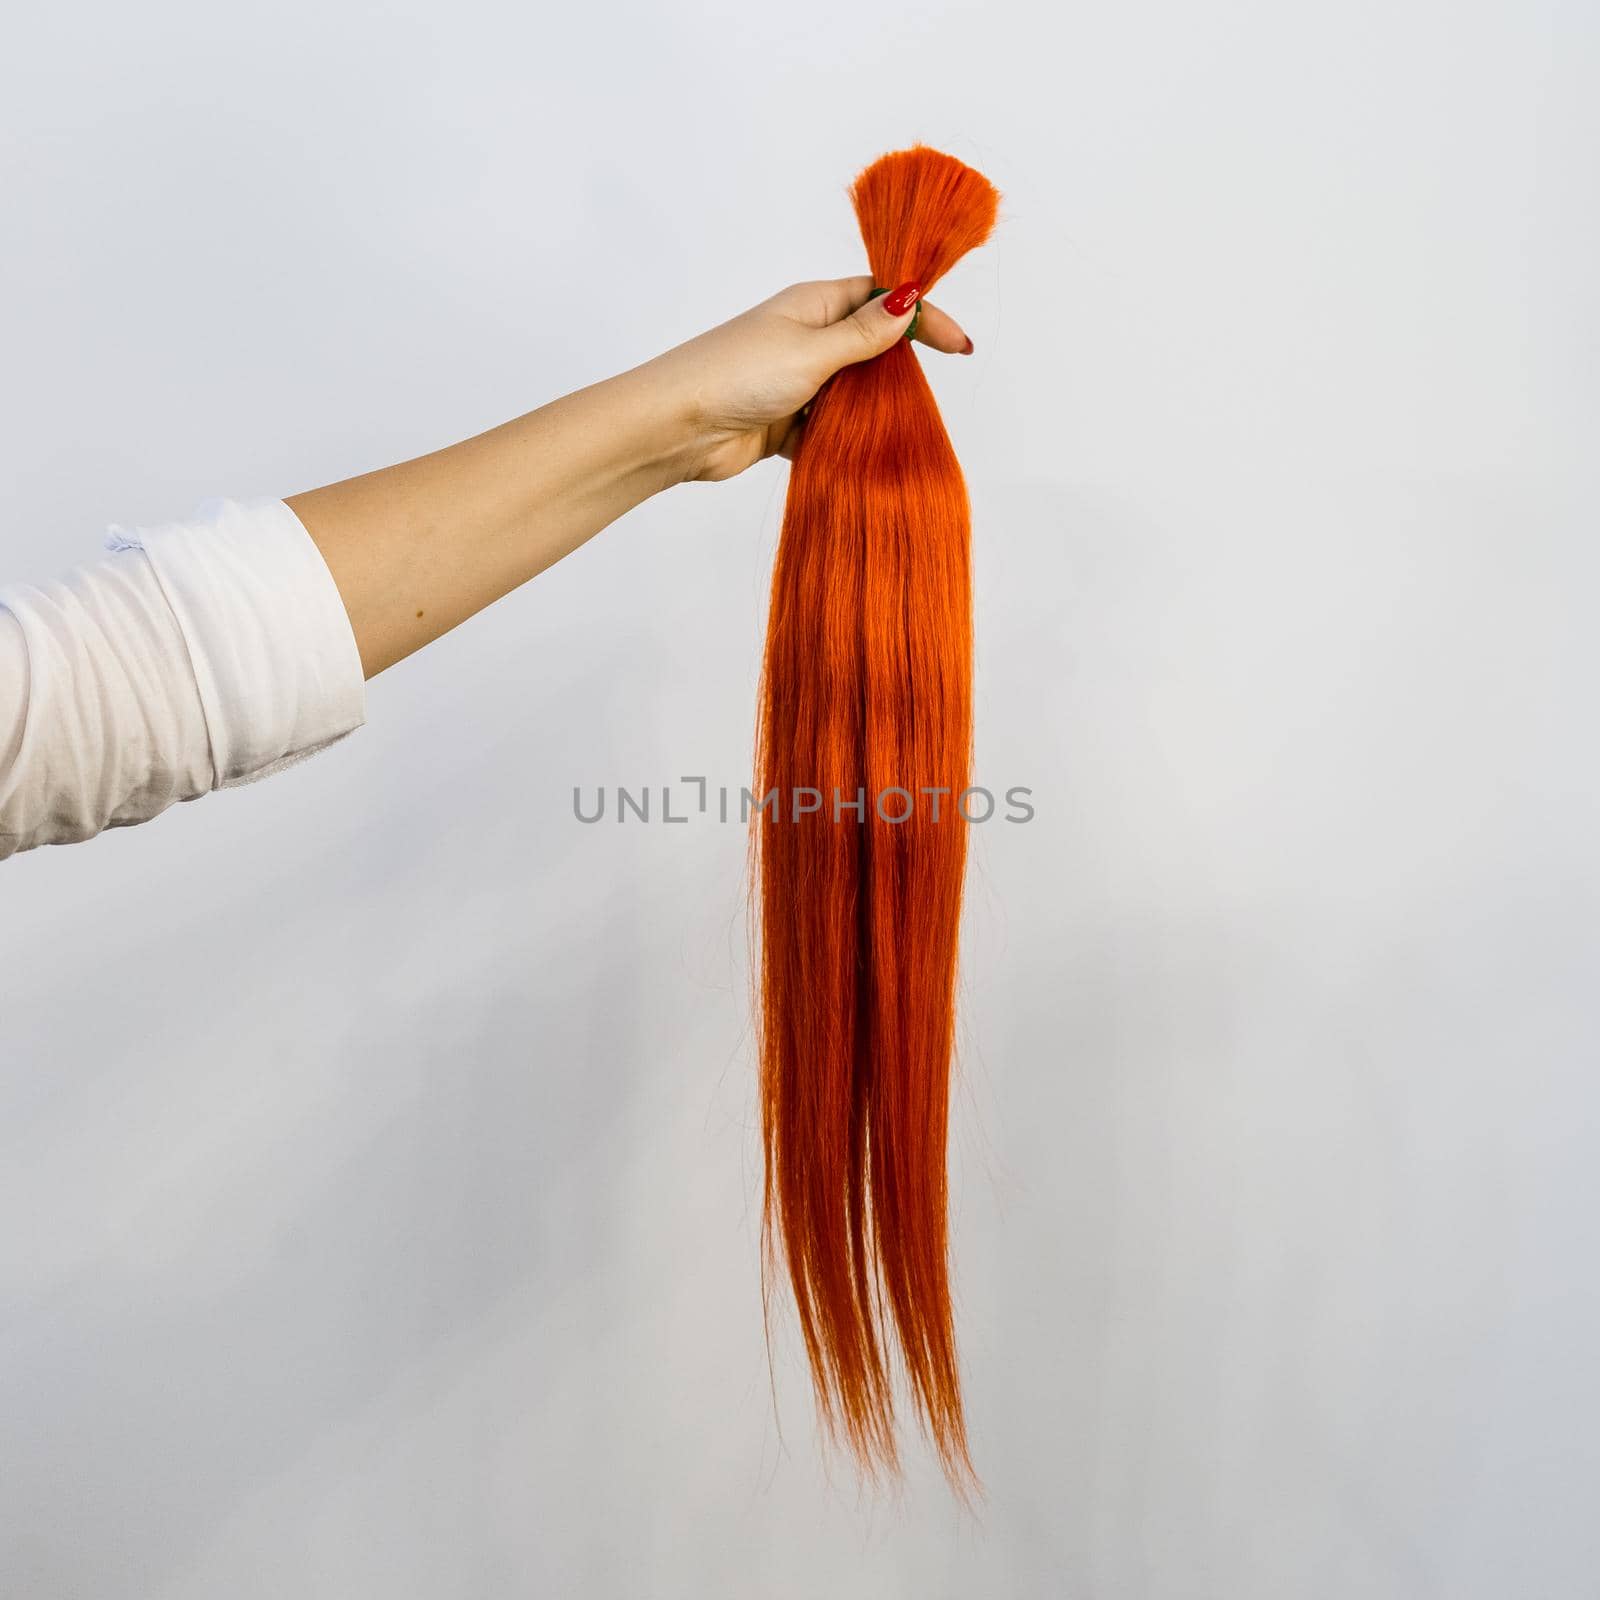 Famale hand holding a bundle of red natural remy human hair extensions over white background